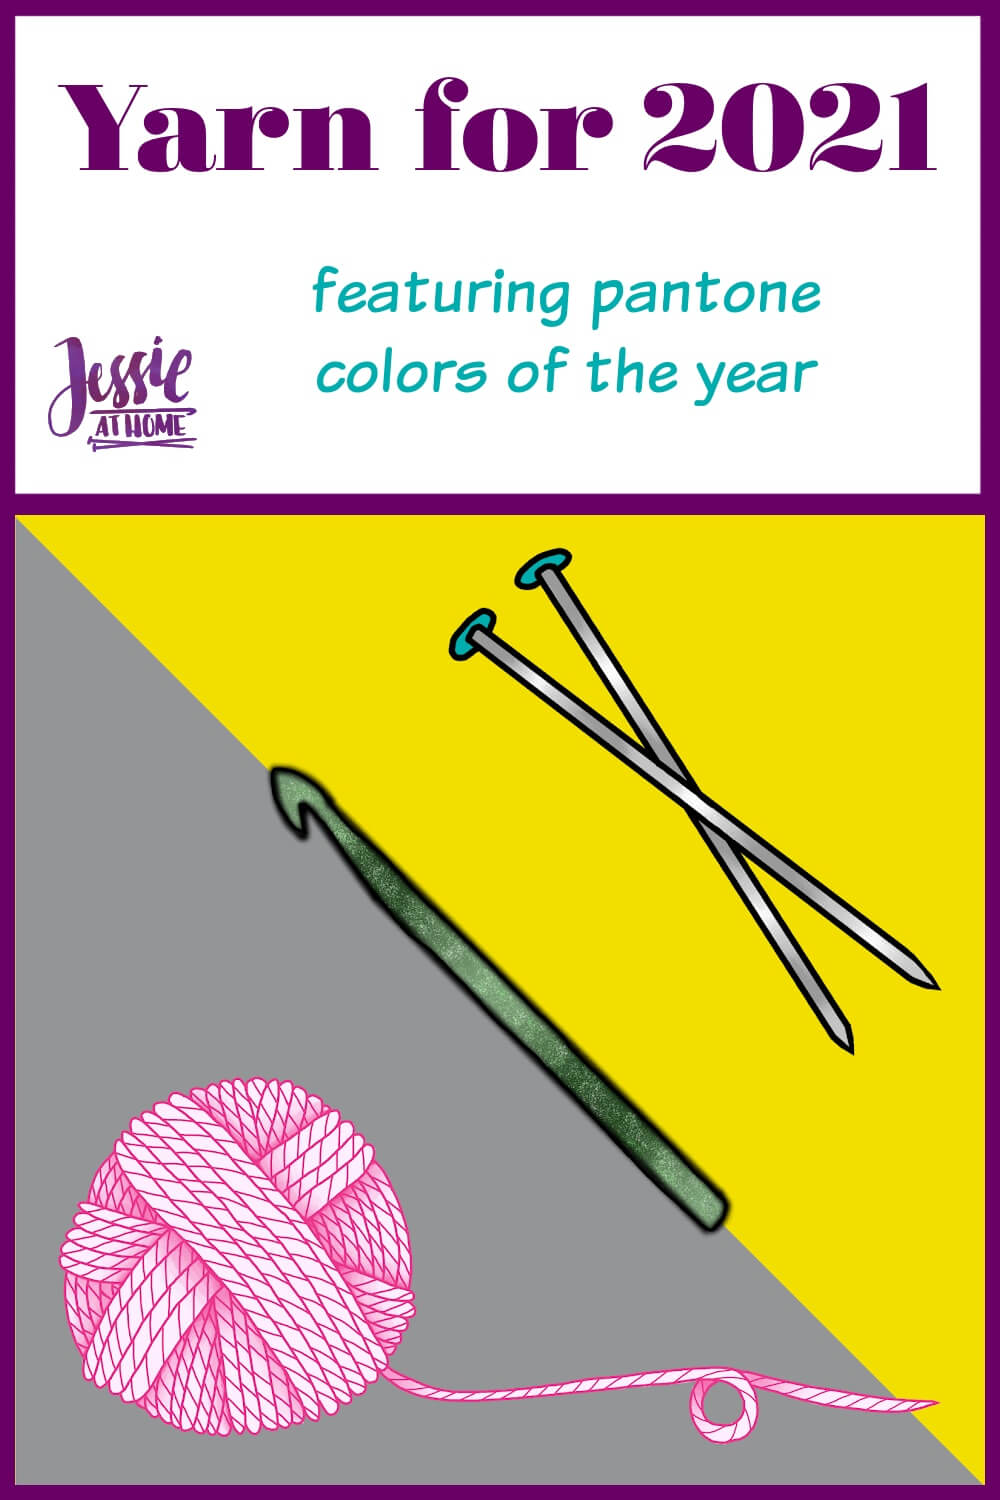 Yarn for 2021 Featuring Pantone Colors of the Year by Jessie At Home - Pin 1